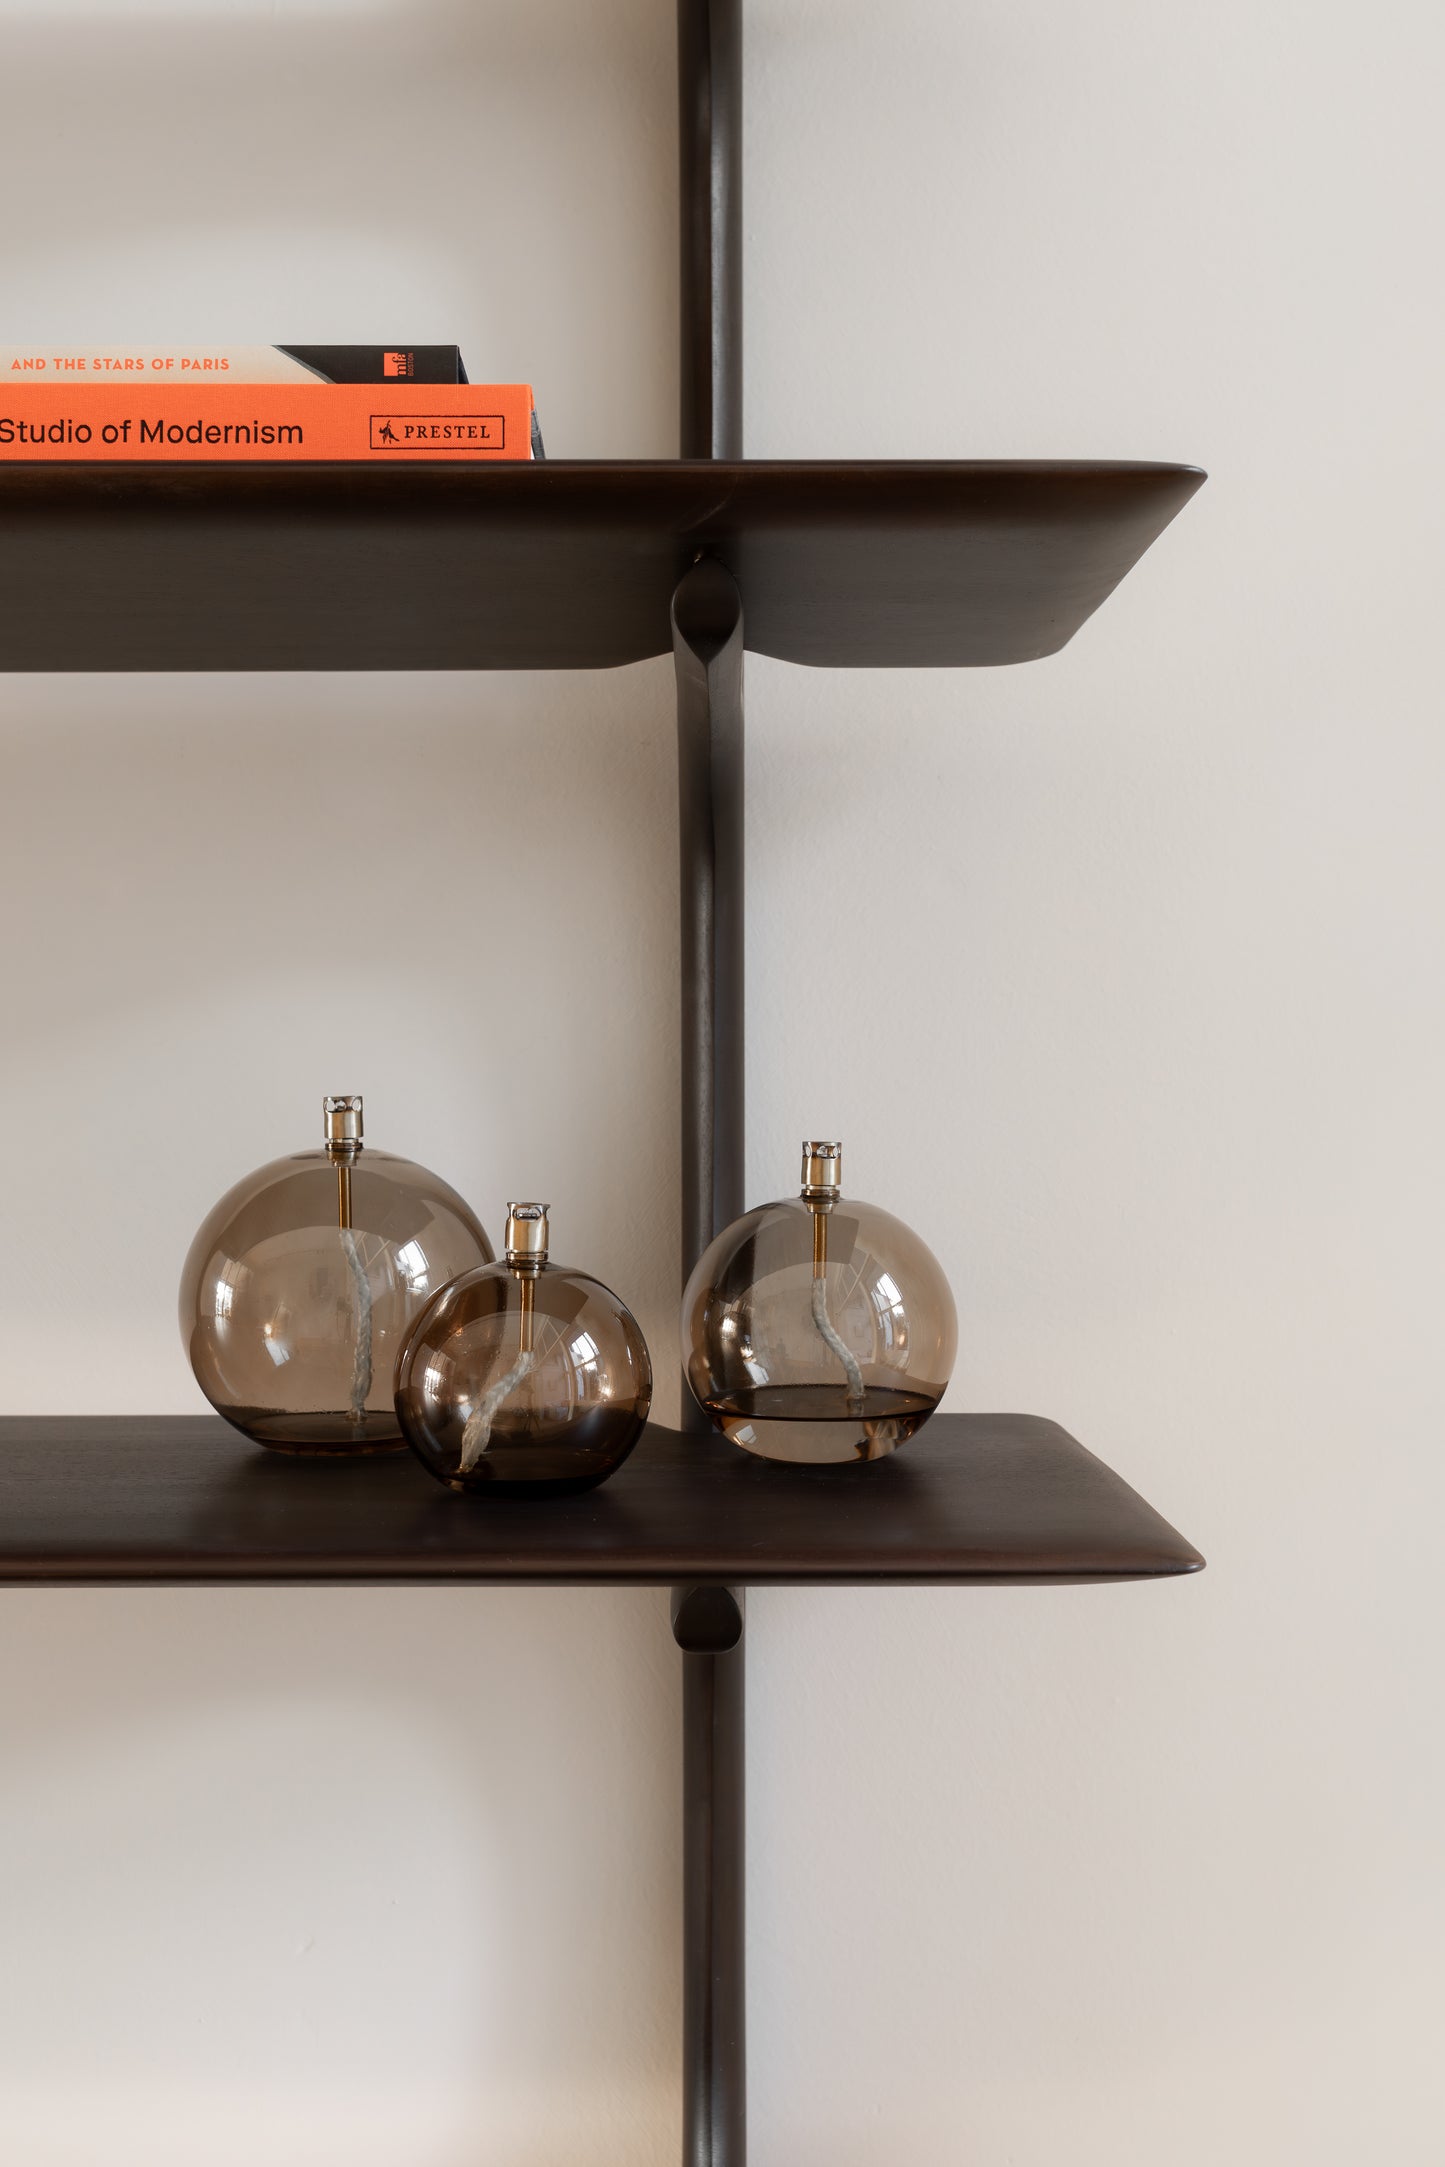 PI Wall Shelf 3 Dark Brown by Ethnicraft with decoration details